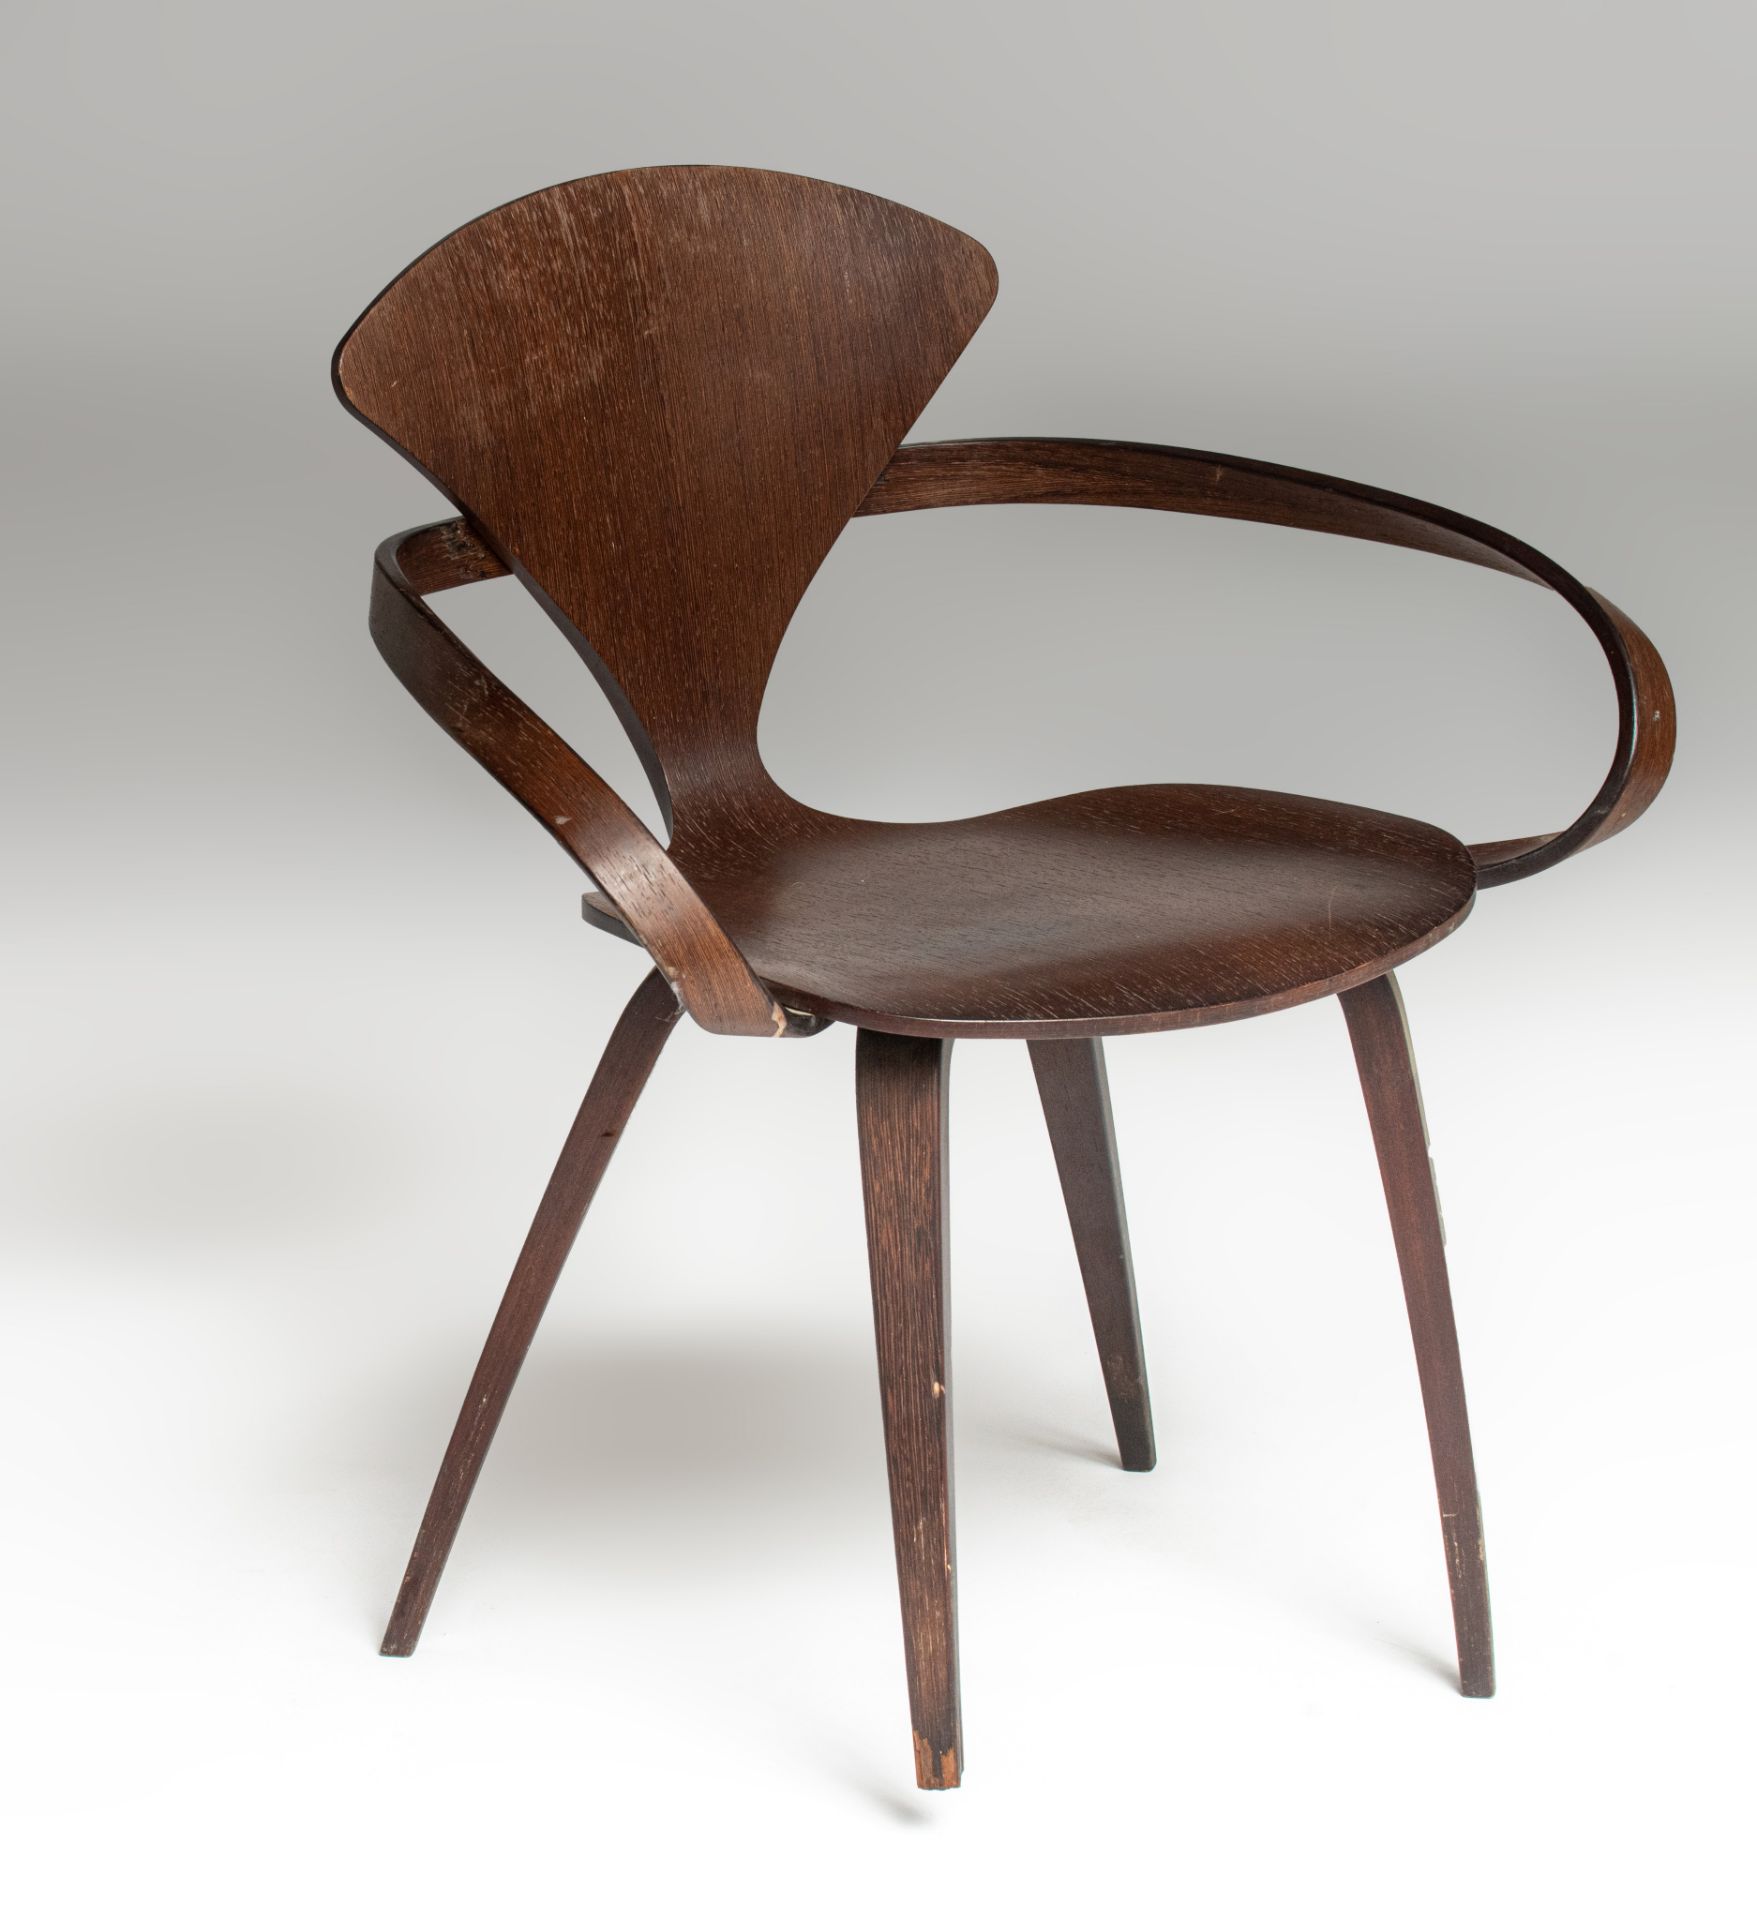 A vintage rosewood Pretzel chair by George Nelson, H 79,5 - W 67 cm - Image 3 of 13